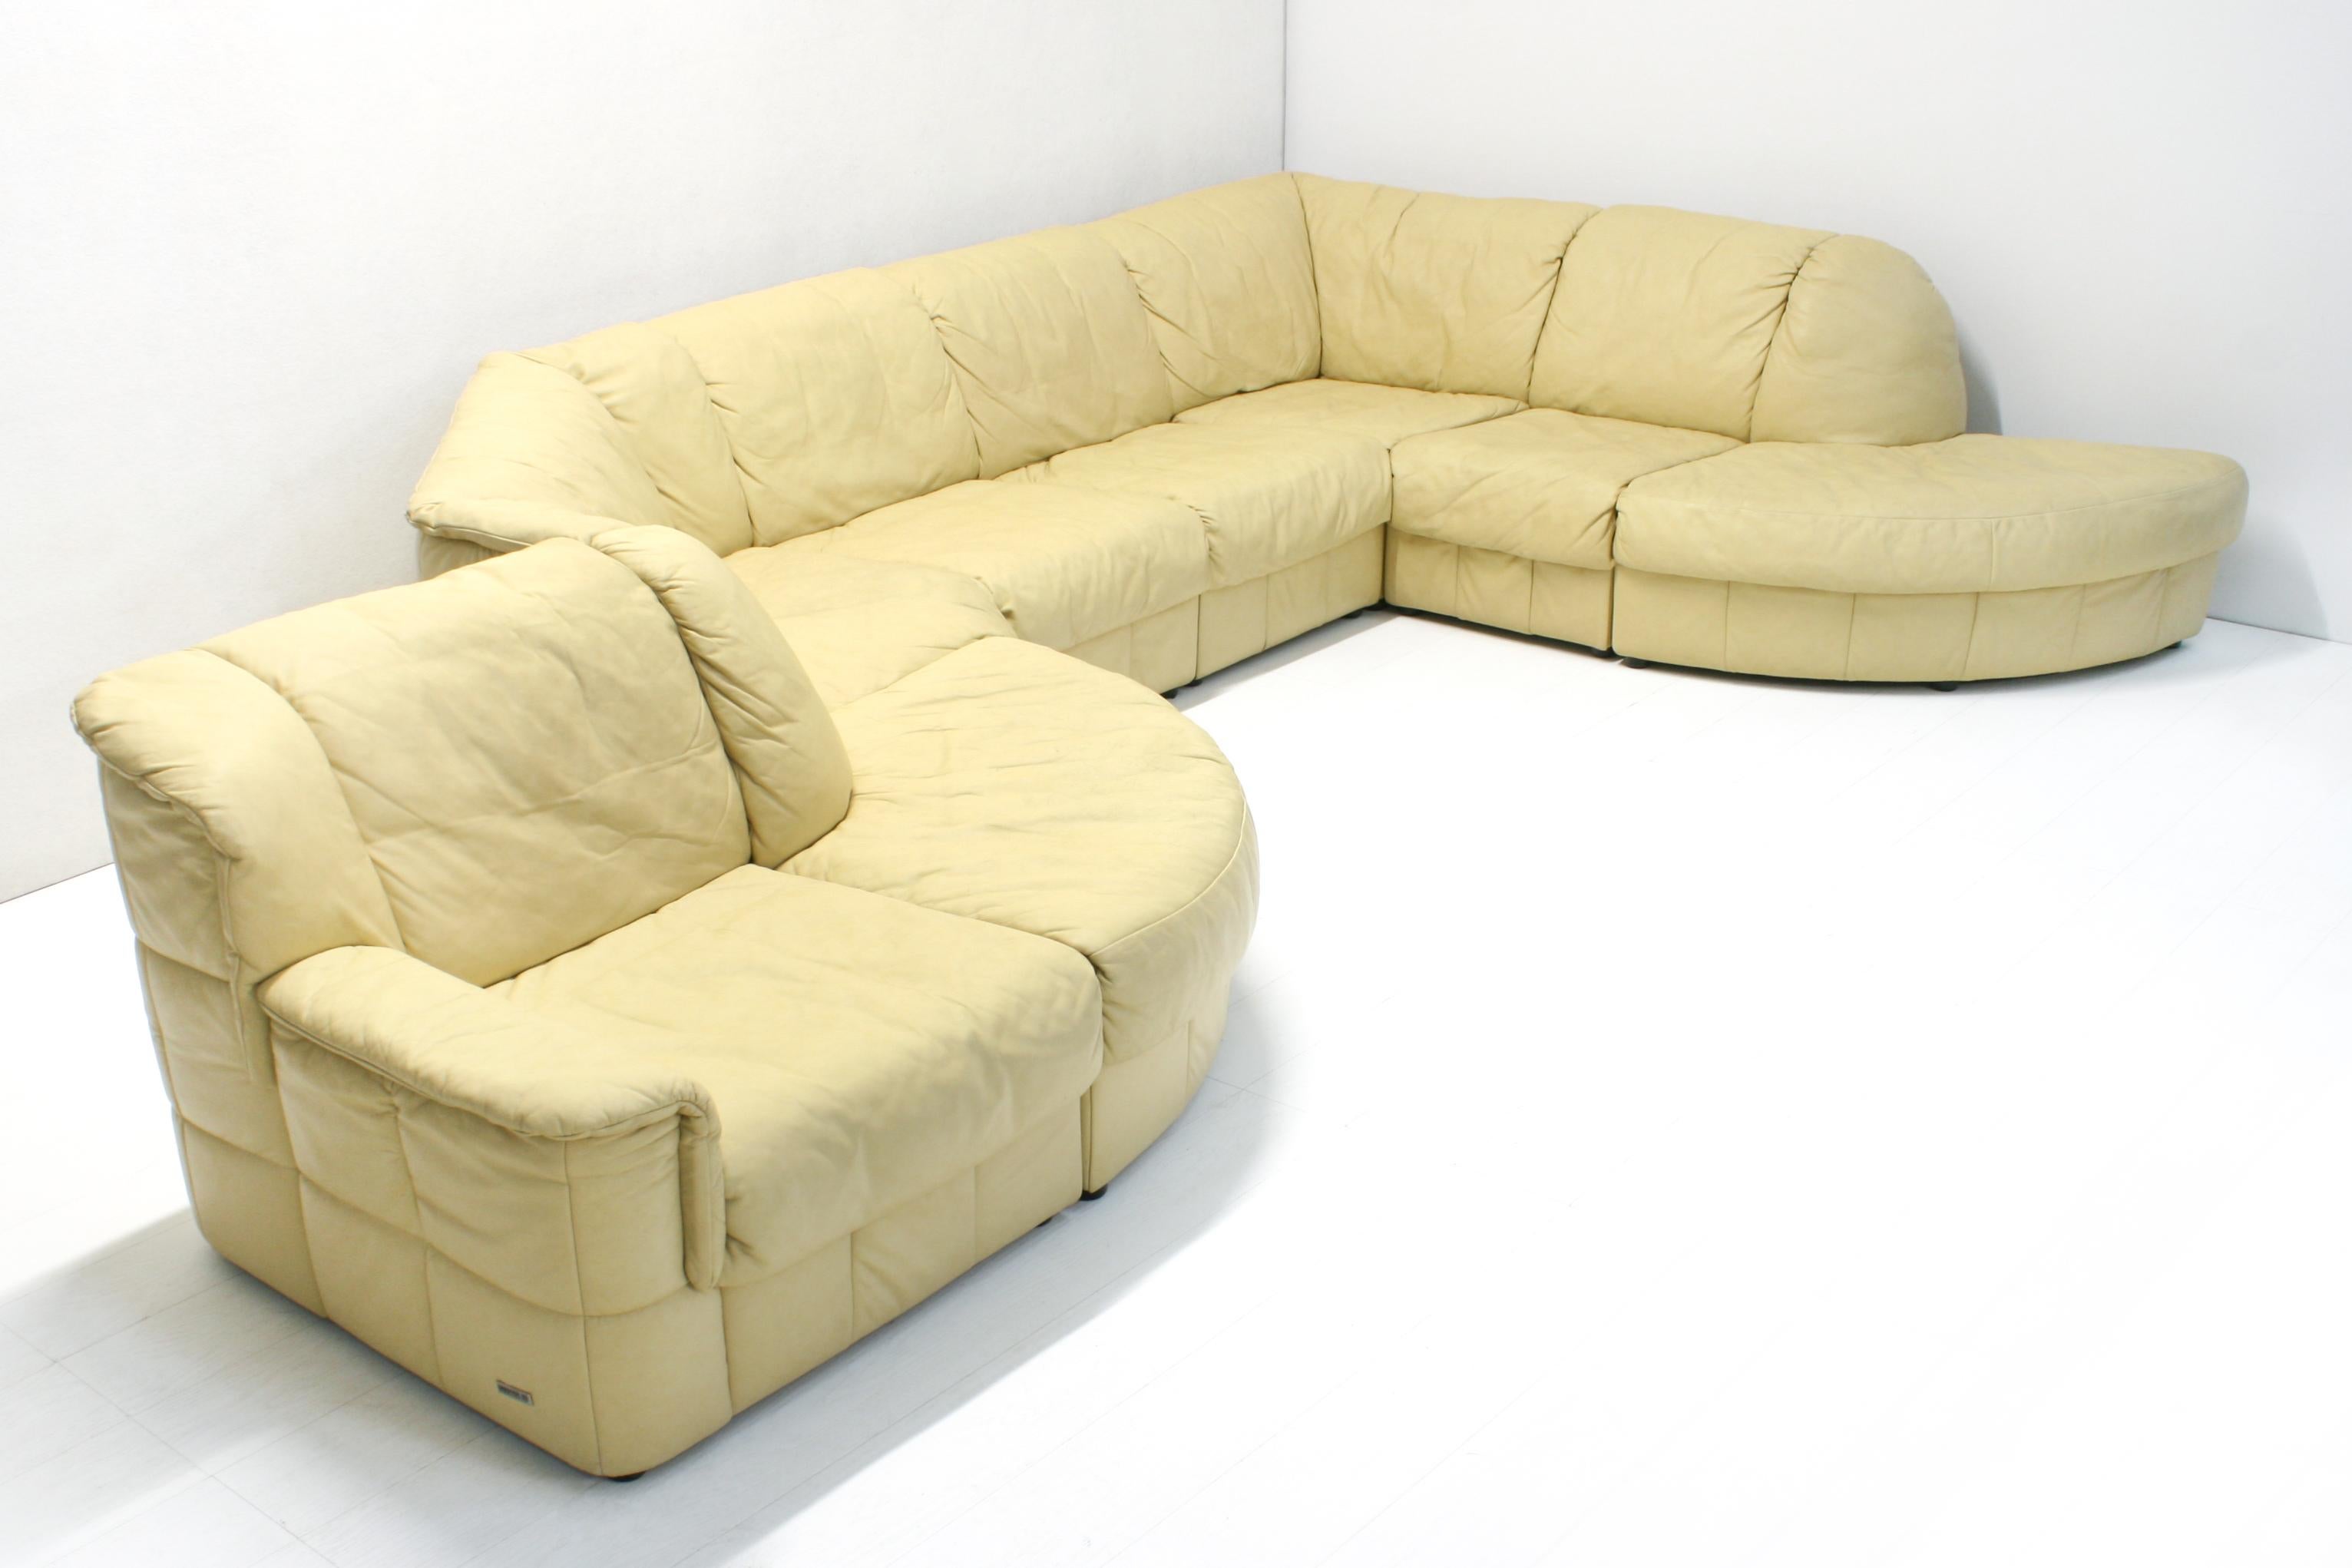 8 Piece Modular Snake Sofa in Yellow Pastel Quilted Leather from Laauser For Sale 13